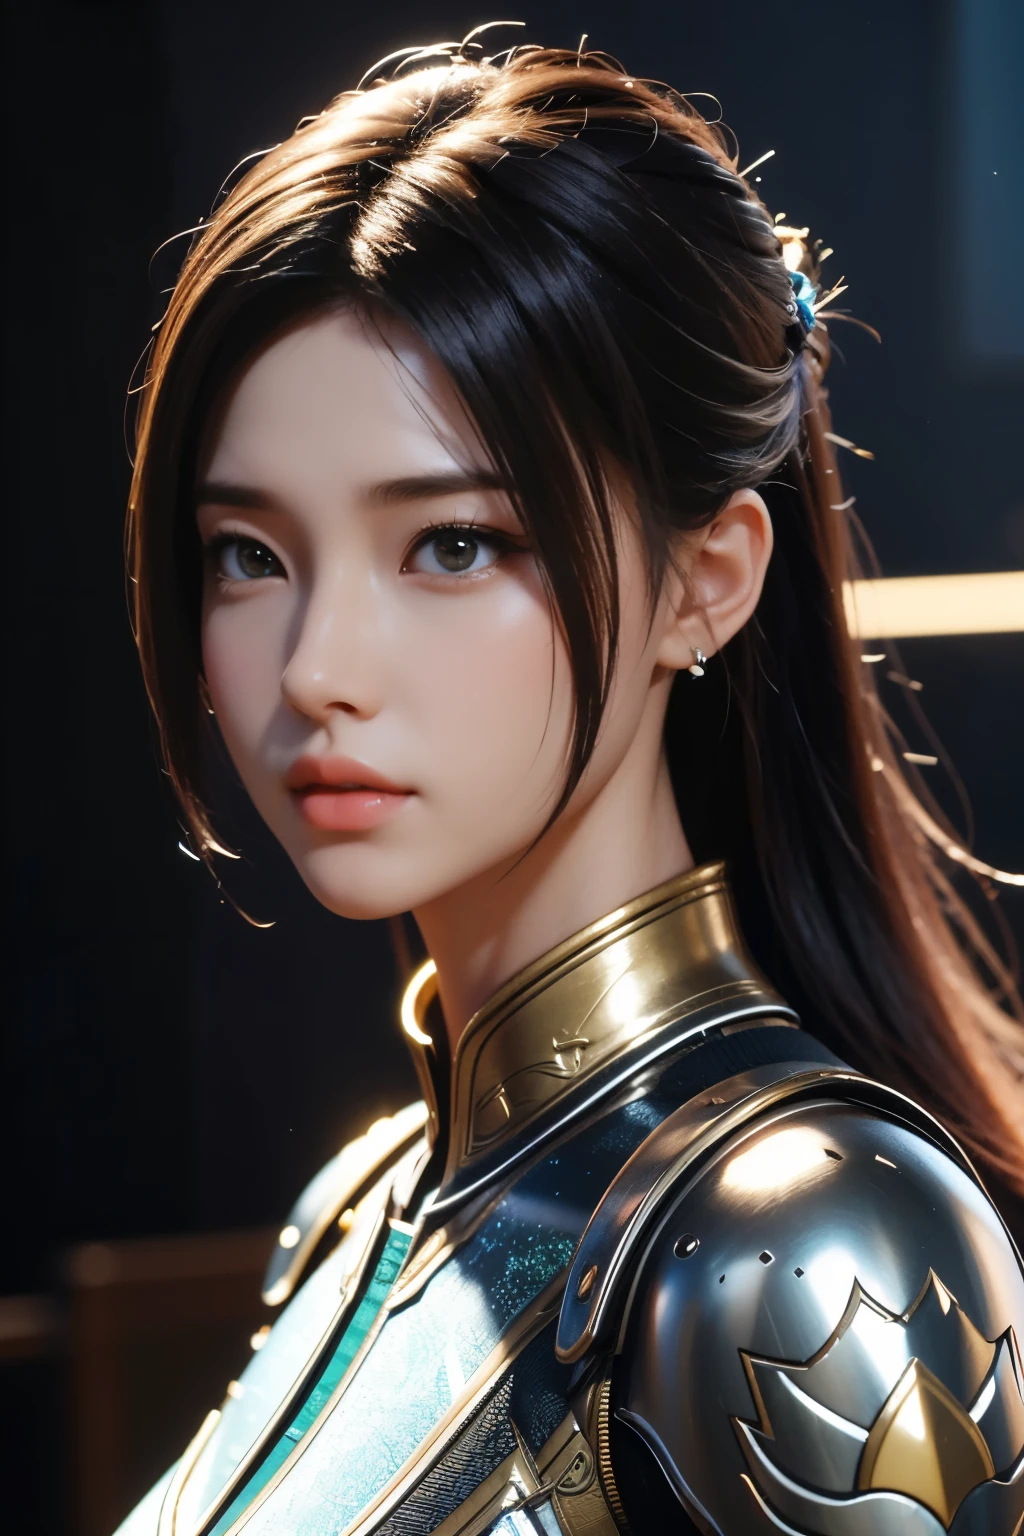 Game art，The best picture quality，Highest resolution，8K，((A bust photograph))，((Portrait))，(Rule of thirds)，Unreal Engine 5 rendering works， (The Girl of the Future)，(Female Warrior)，22-year-old girl，(Hair random)，(A beautiful eye full of detail)，(Big breasts)，Elegant and charming，Smile，(frown)，(Clothes full of futuristic sci-fi style，Sweater，A delicate pattern，Glittering jewels，Armor，White and red)，Cyberpunk Characters，Future Style， Photo poses，Street background，Movie lights，Ray tracing，Game CG，((3D Unreal Engine))，oc rendering reflection pattern